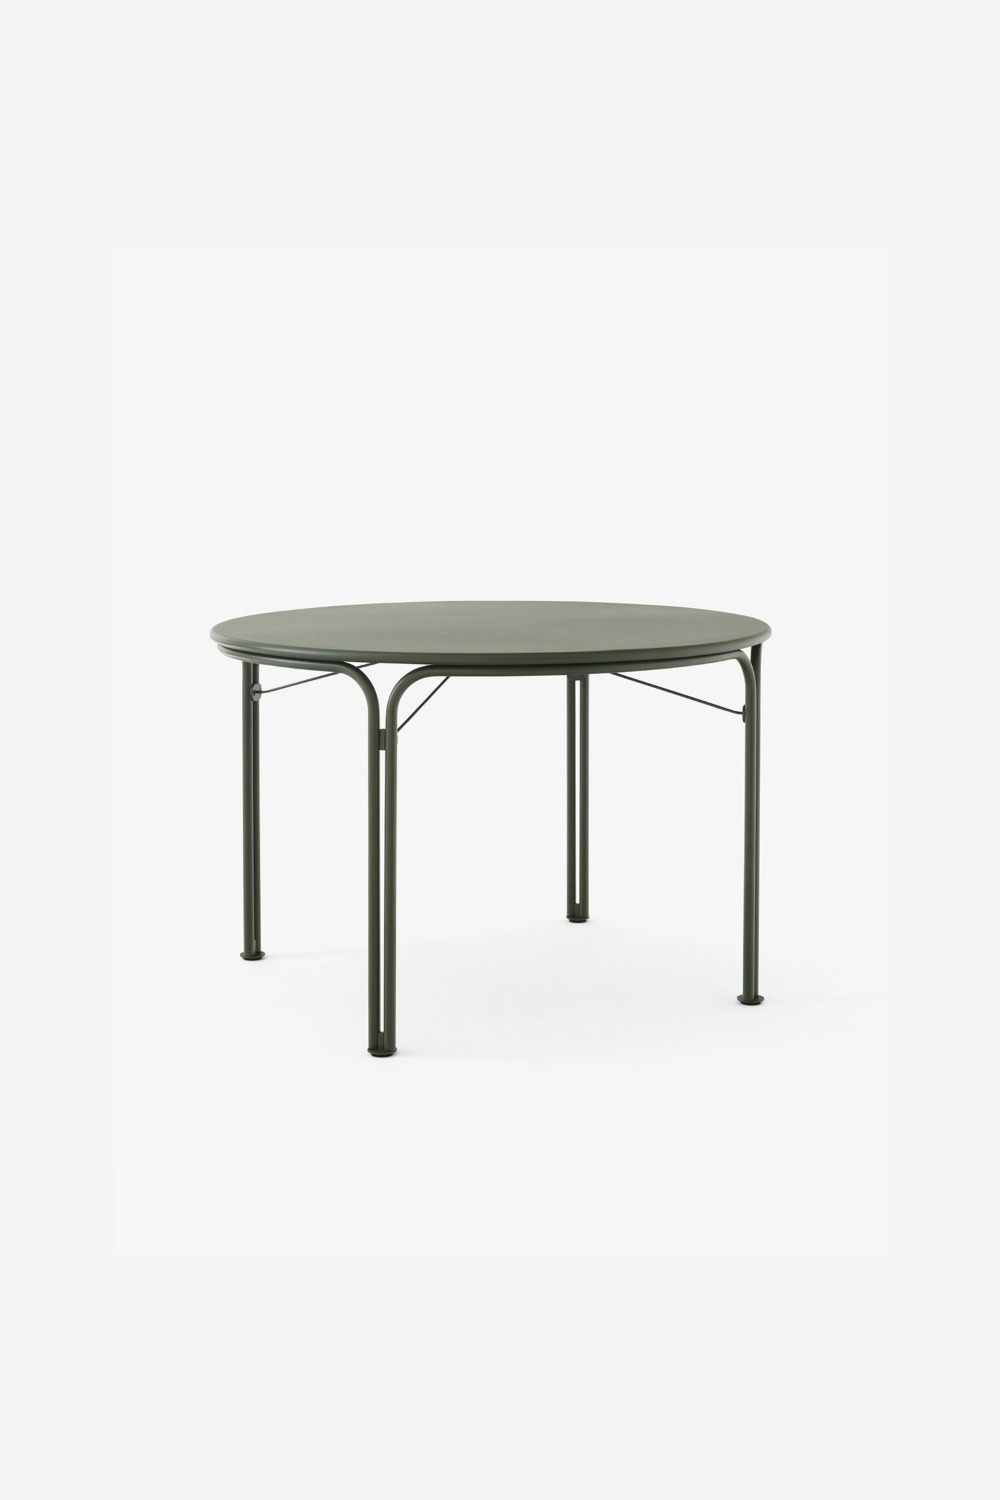 [&amp;Tradition] Thorvald DiningTable /SC98 (Bronze Green)